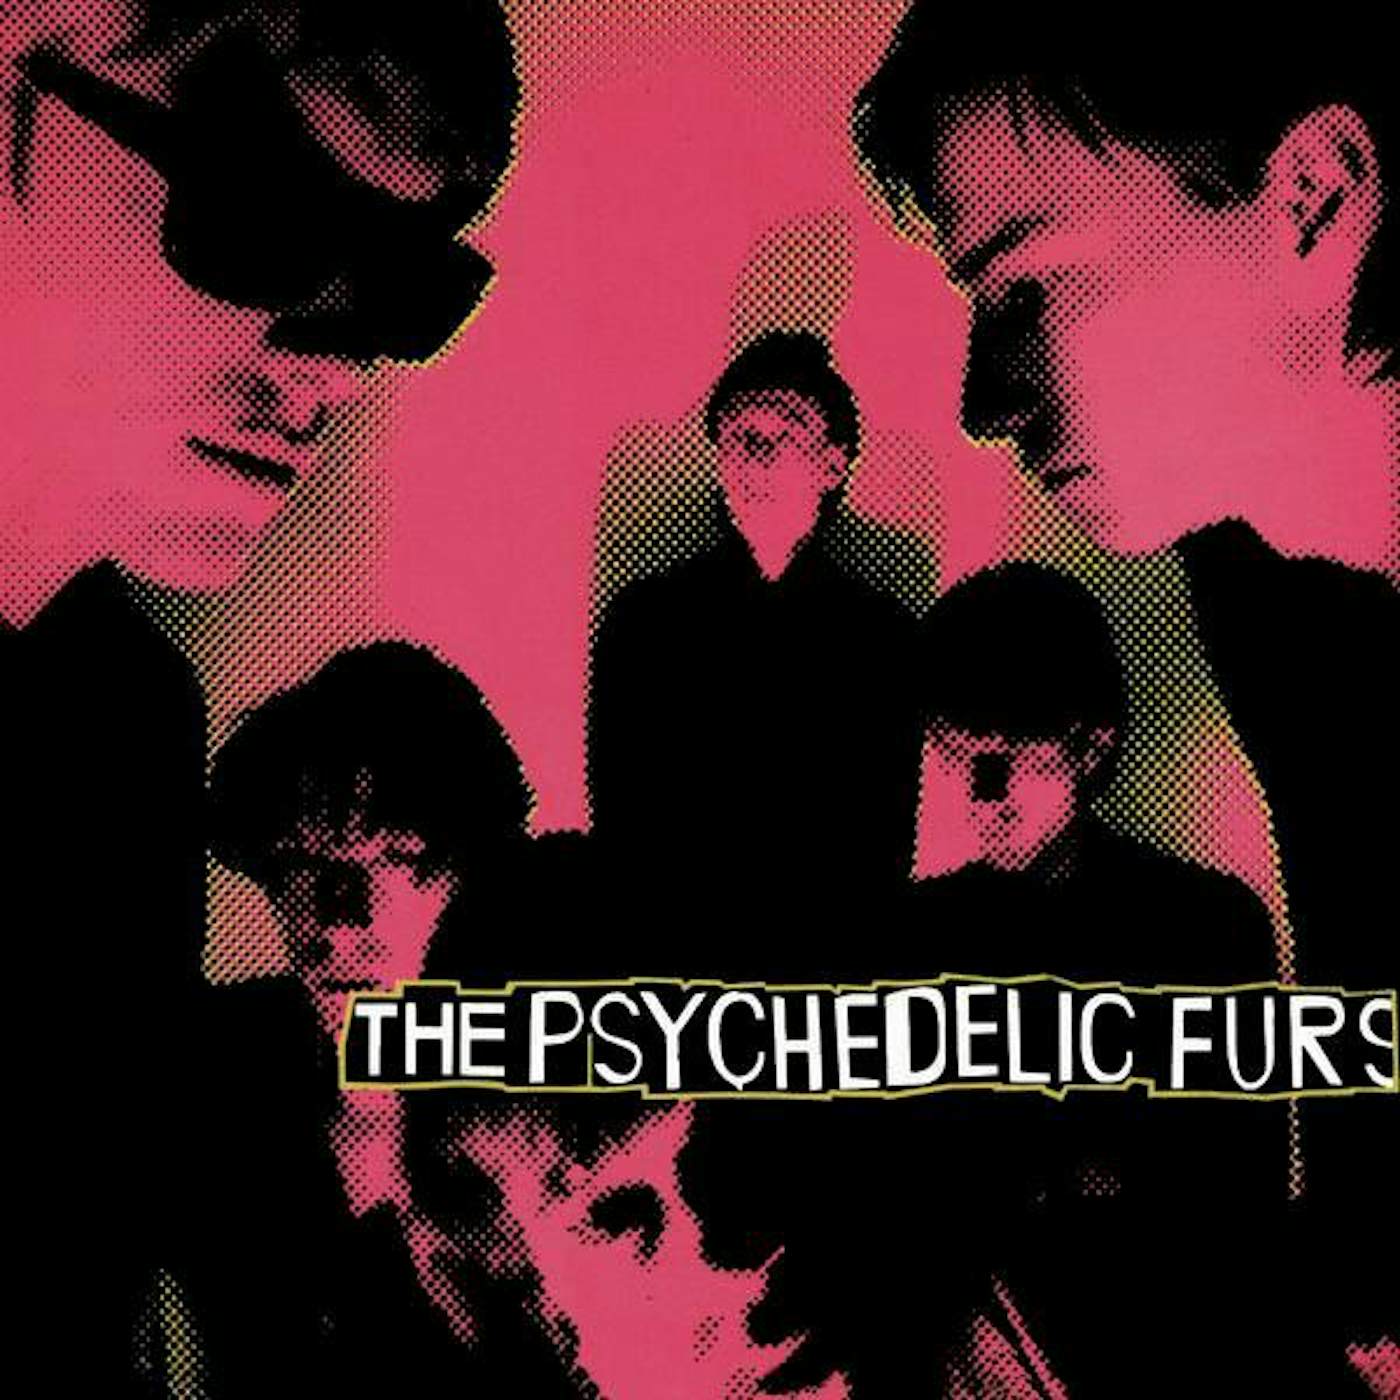 The Psychedelic Furs CD